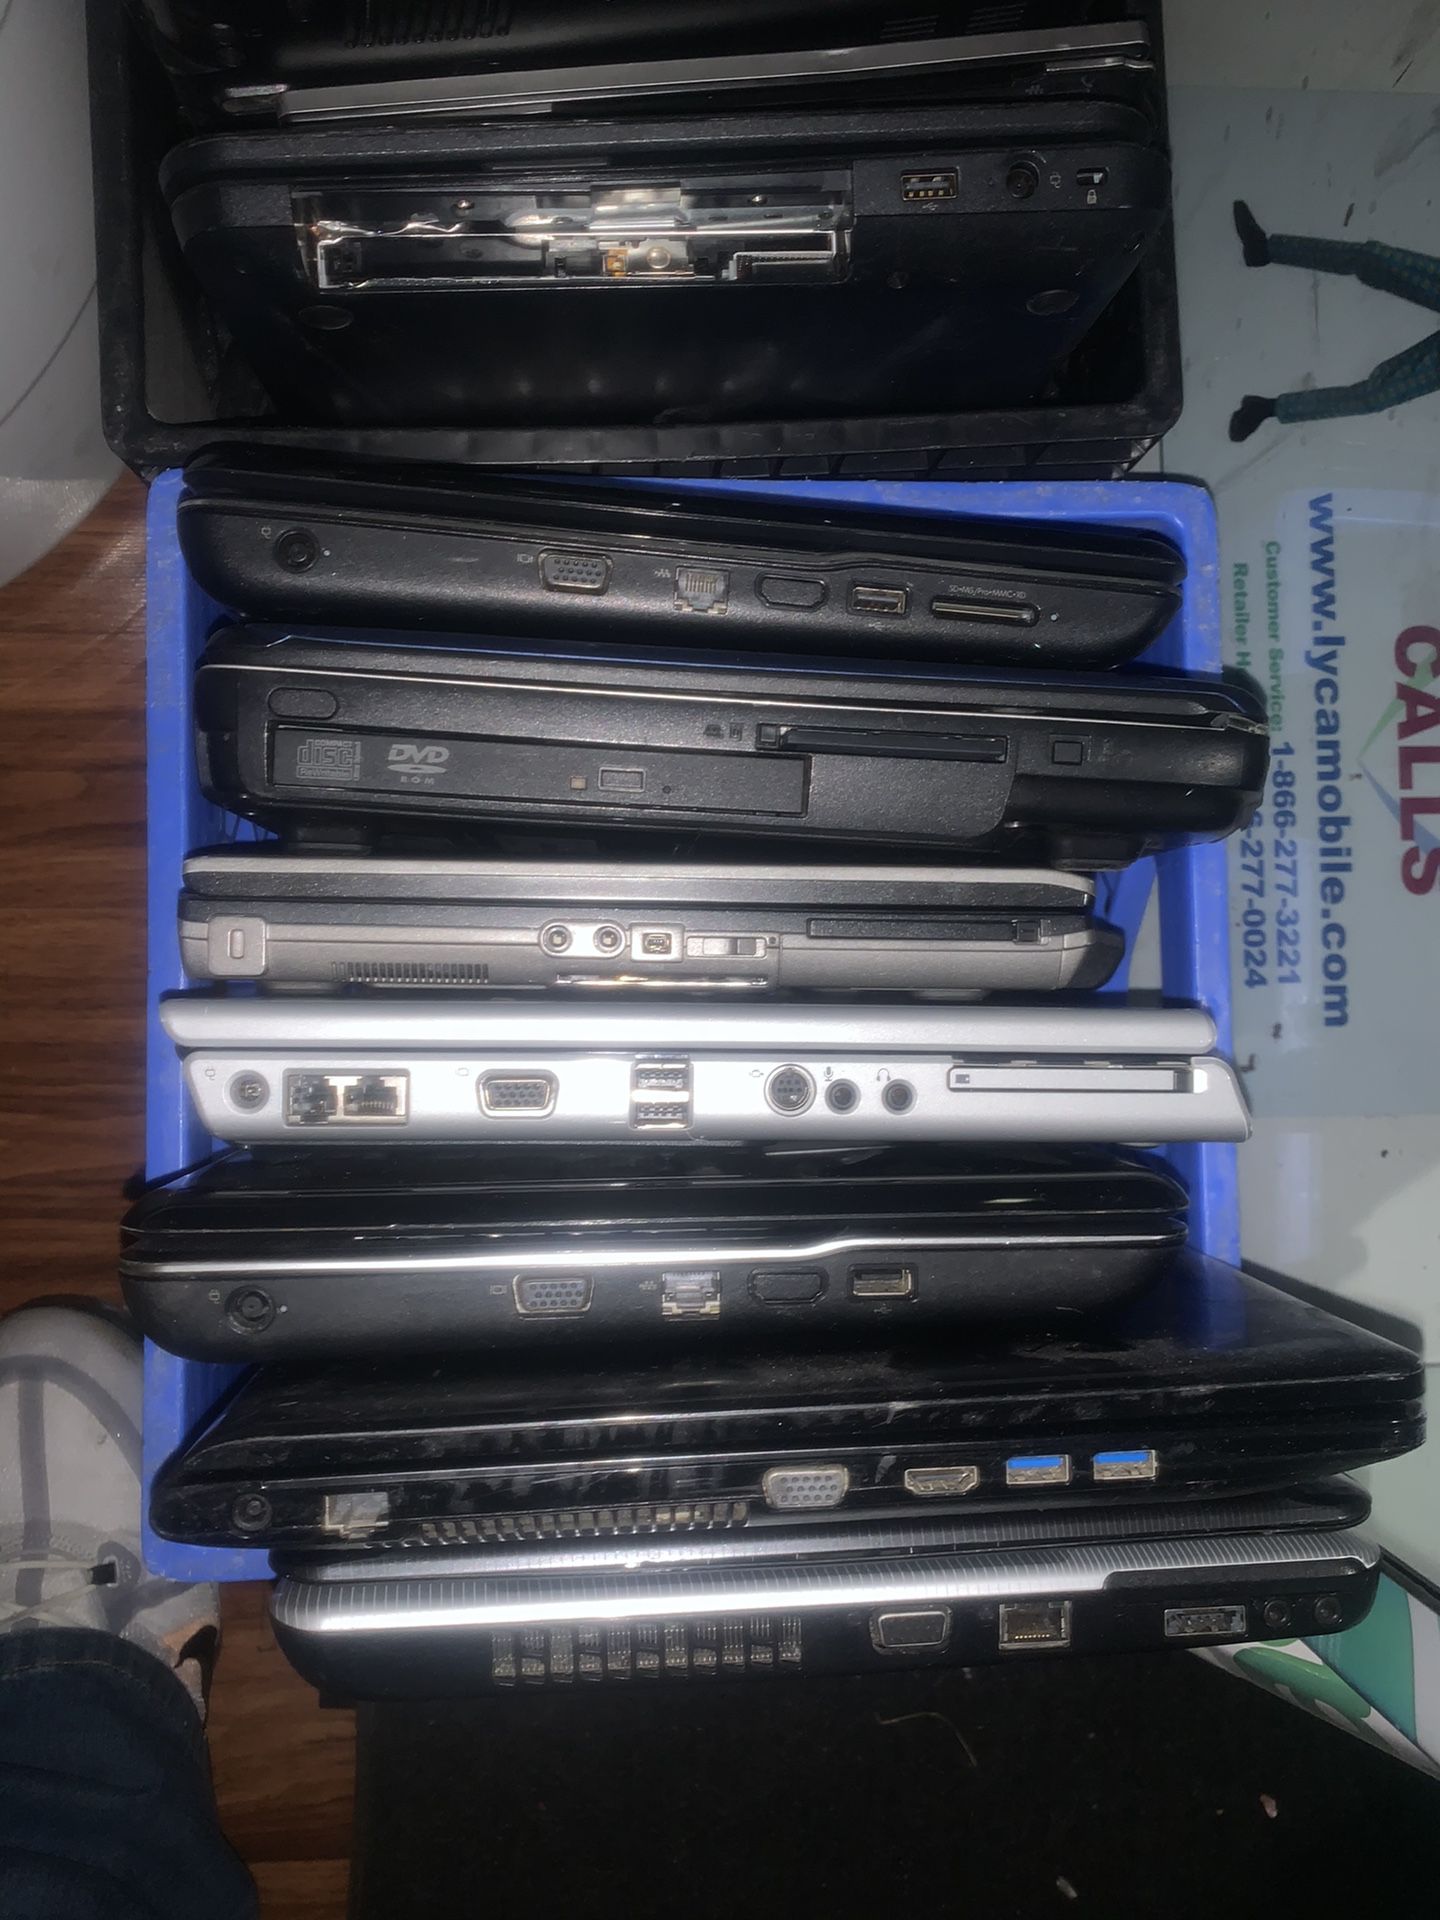 Laptops for repair or parts $5 each